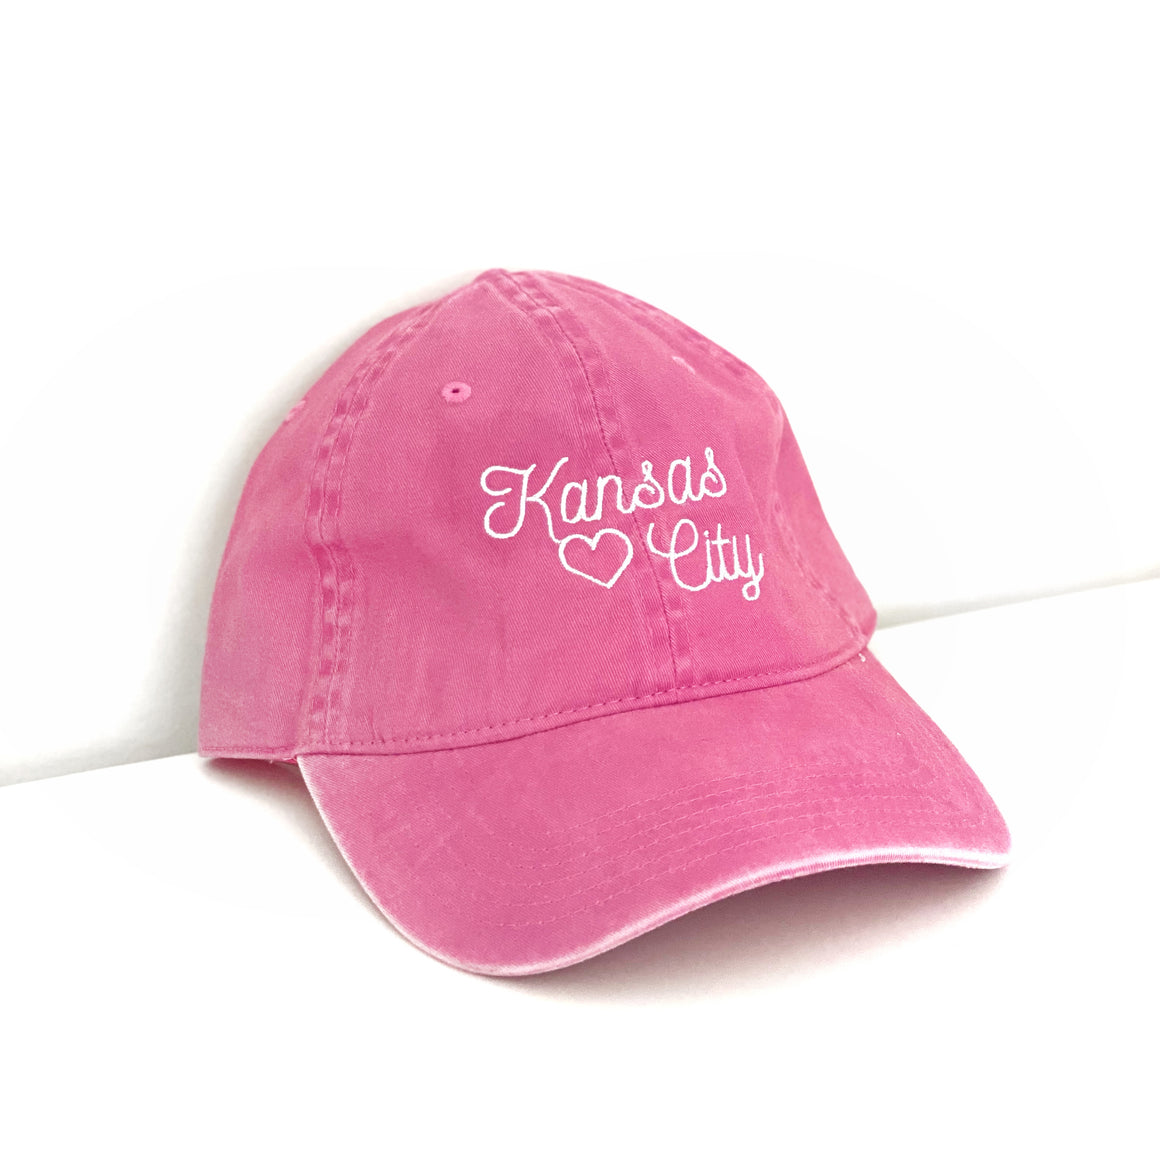 Kansas City Embroidered Hat - Pink